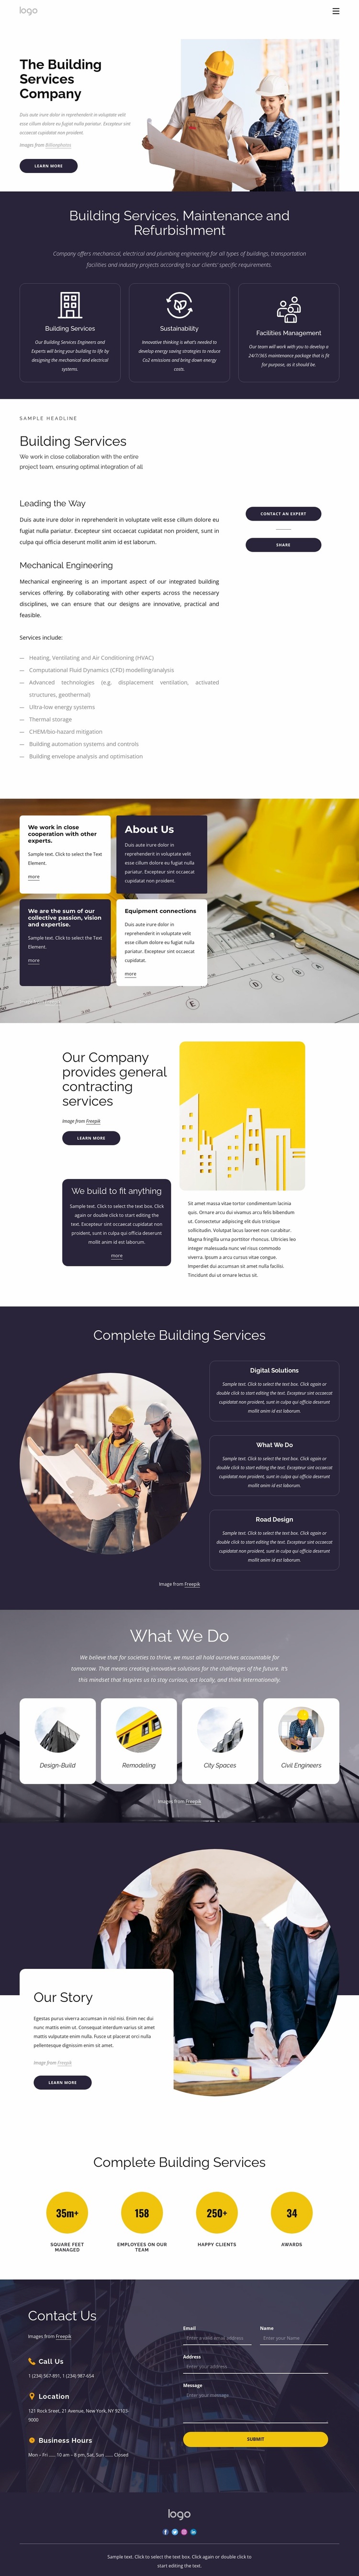 The building services company Website Builder Templates